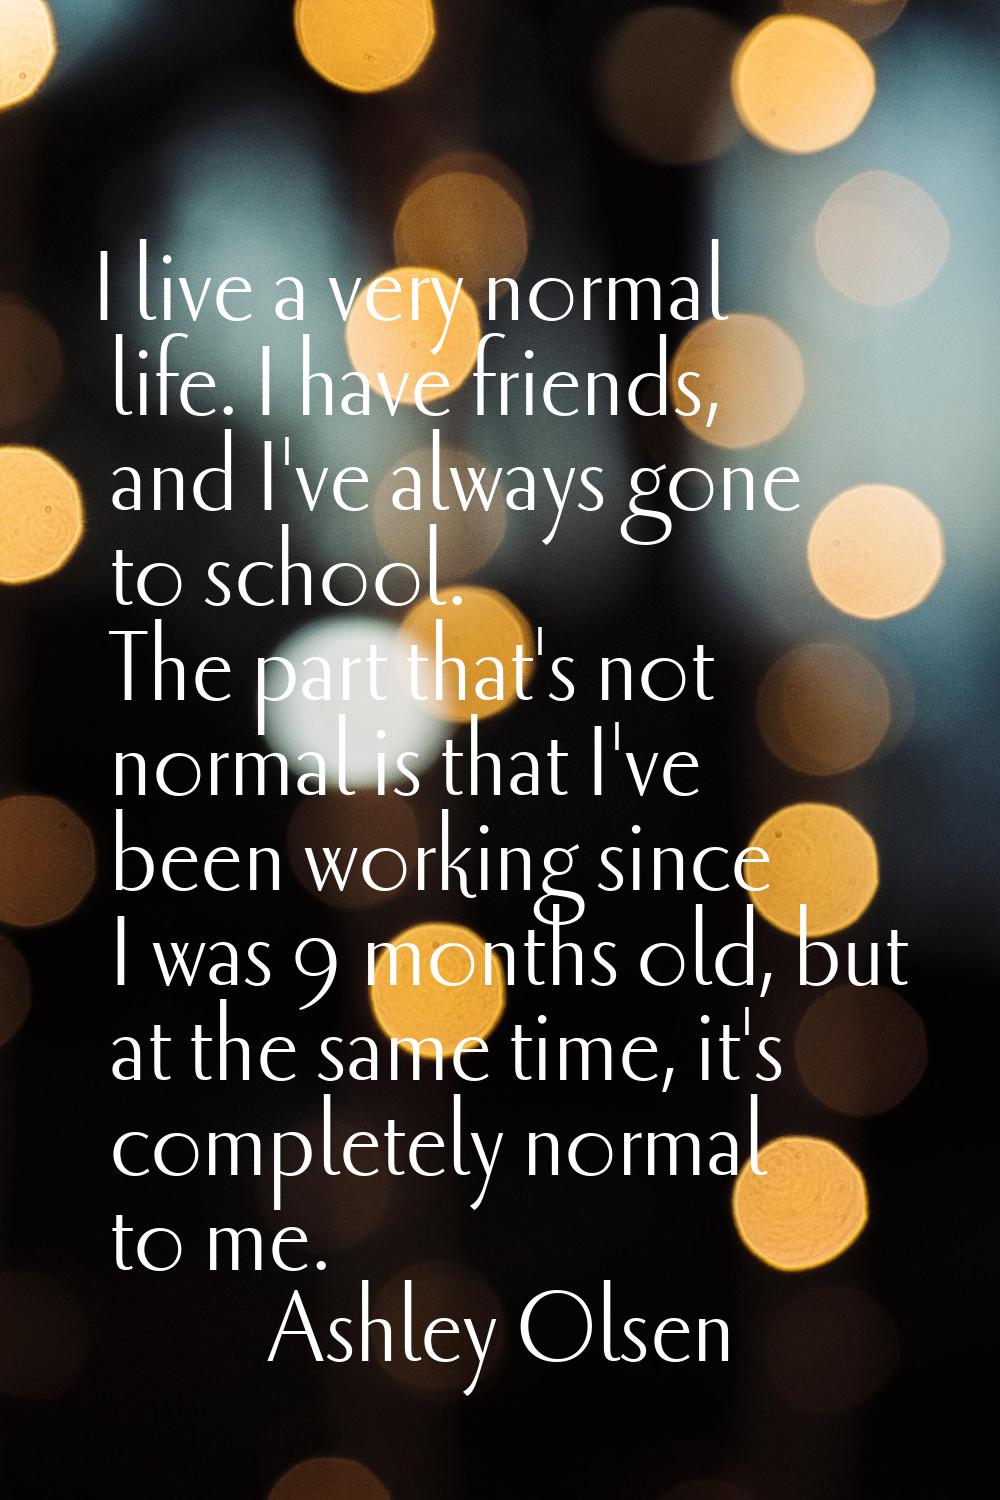 I live a very normal life. I have friends, and I've always gone to school. The part that's not norm